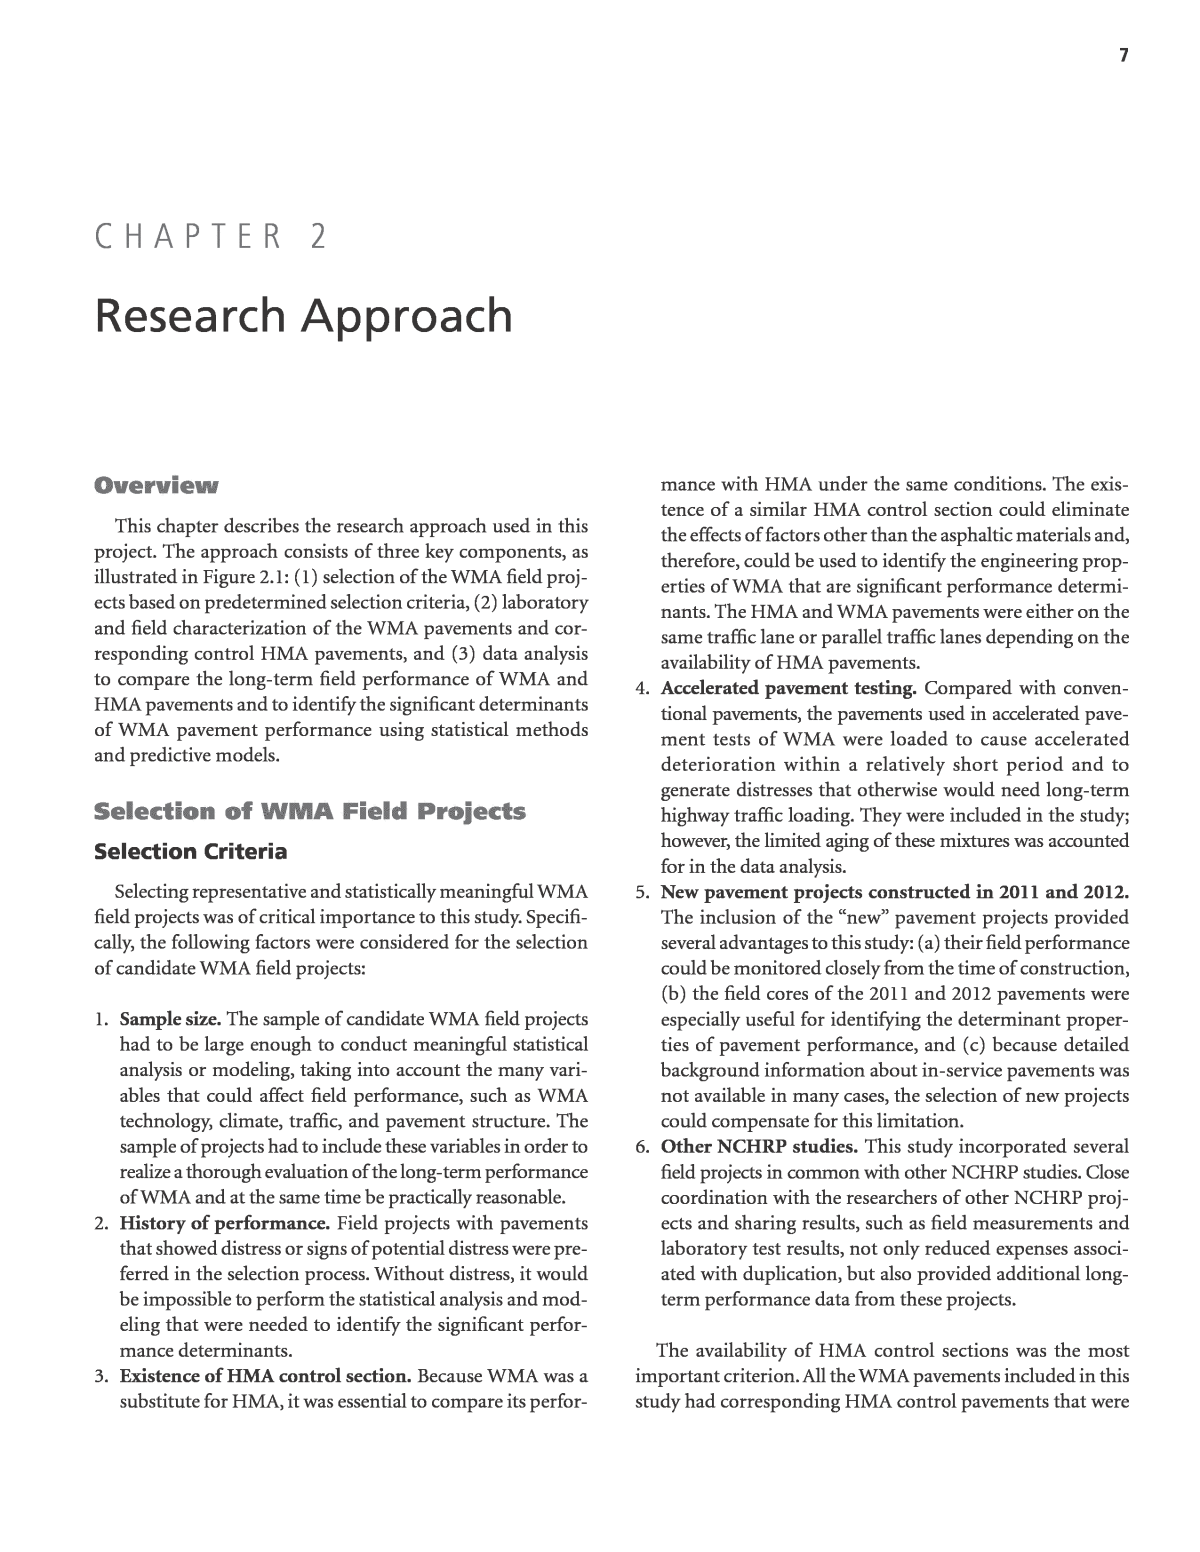 research chapter 2 sample